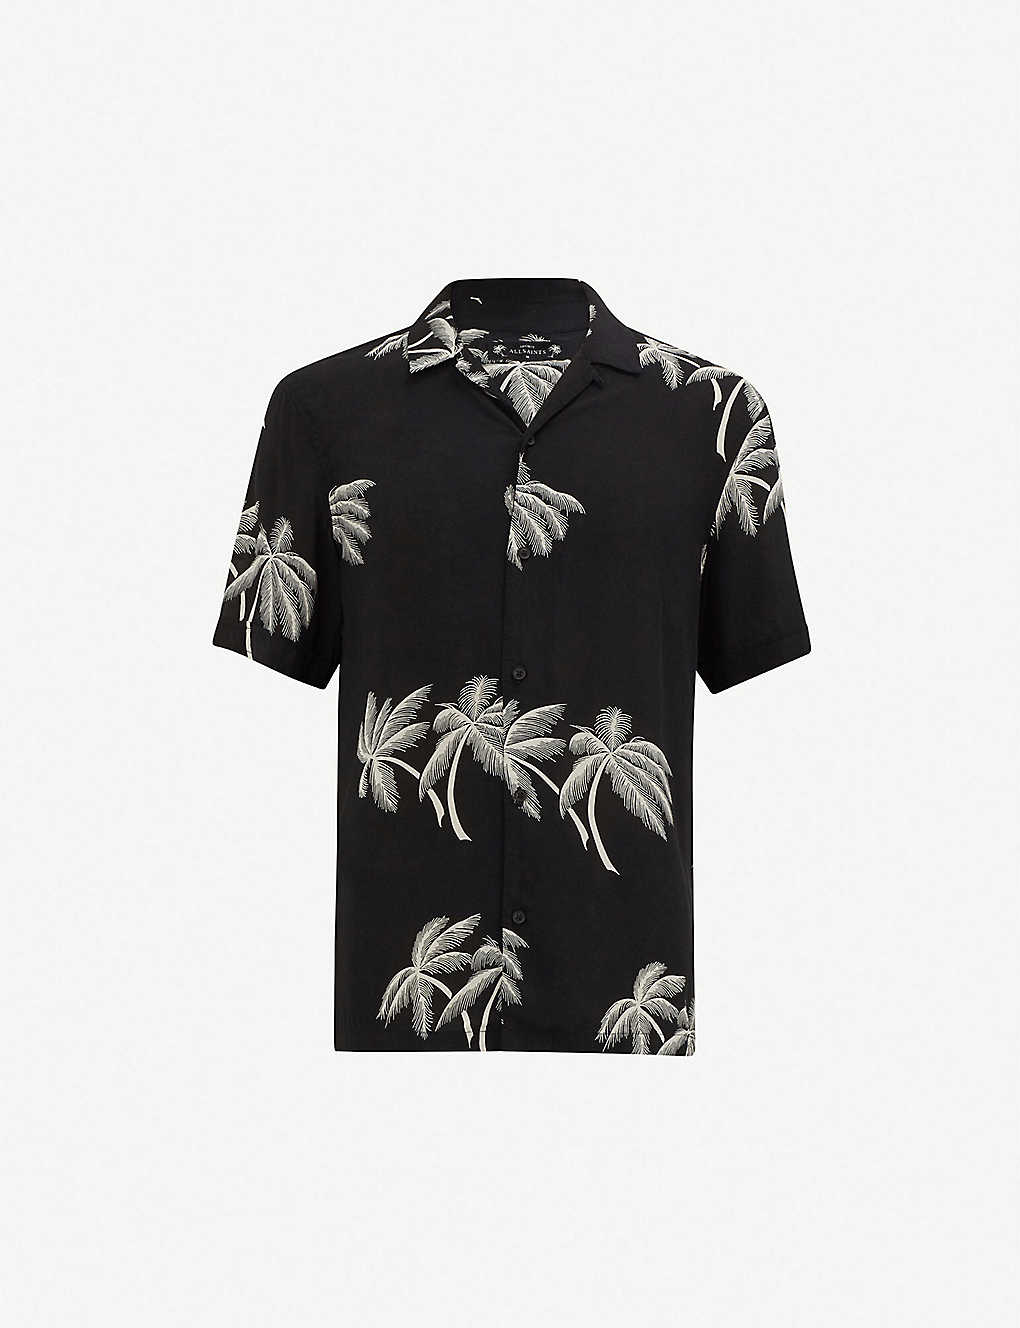 Black White Hawaiian Shirts Polo T Shirts Outlet Official Online